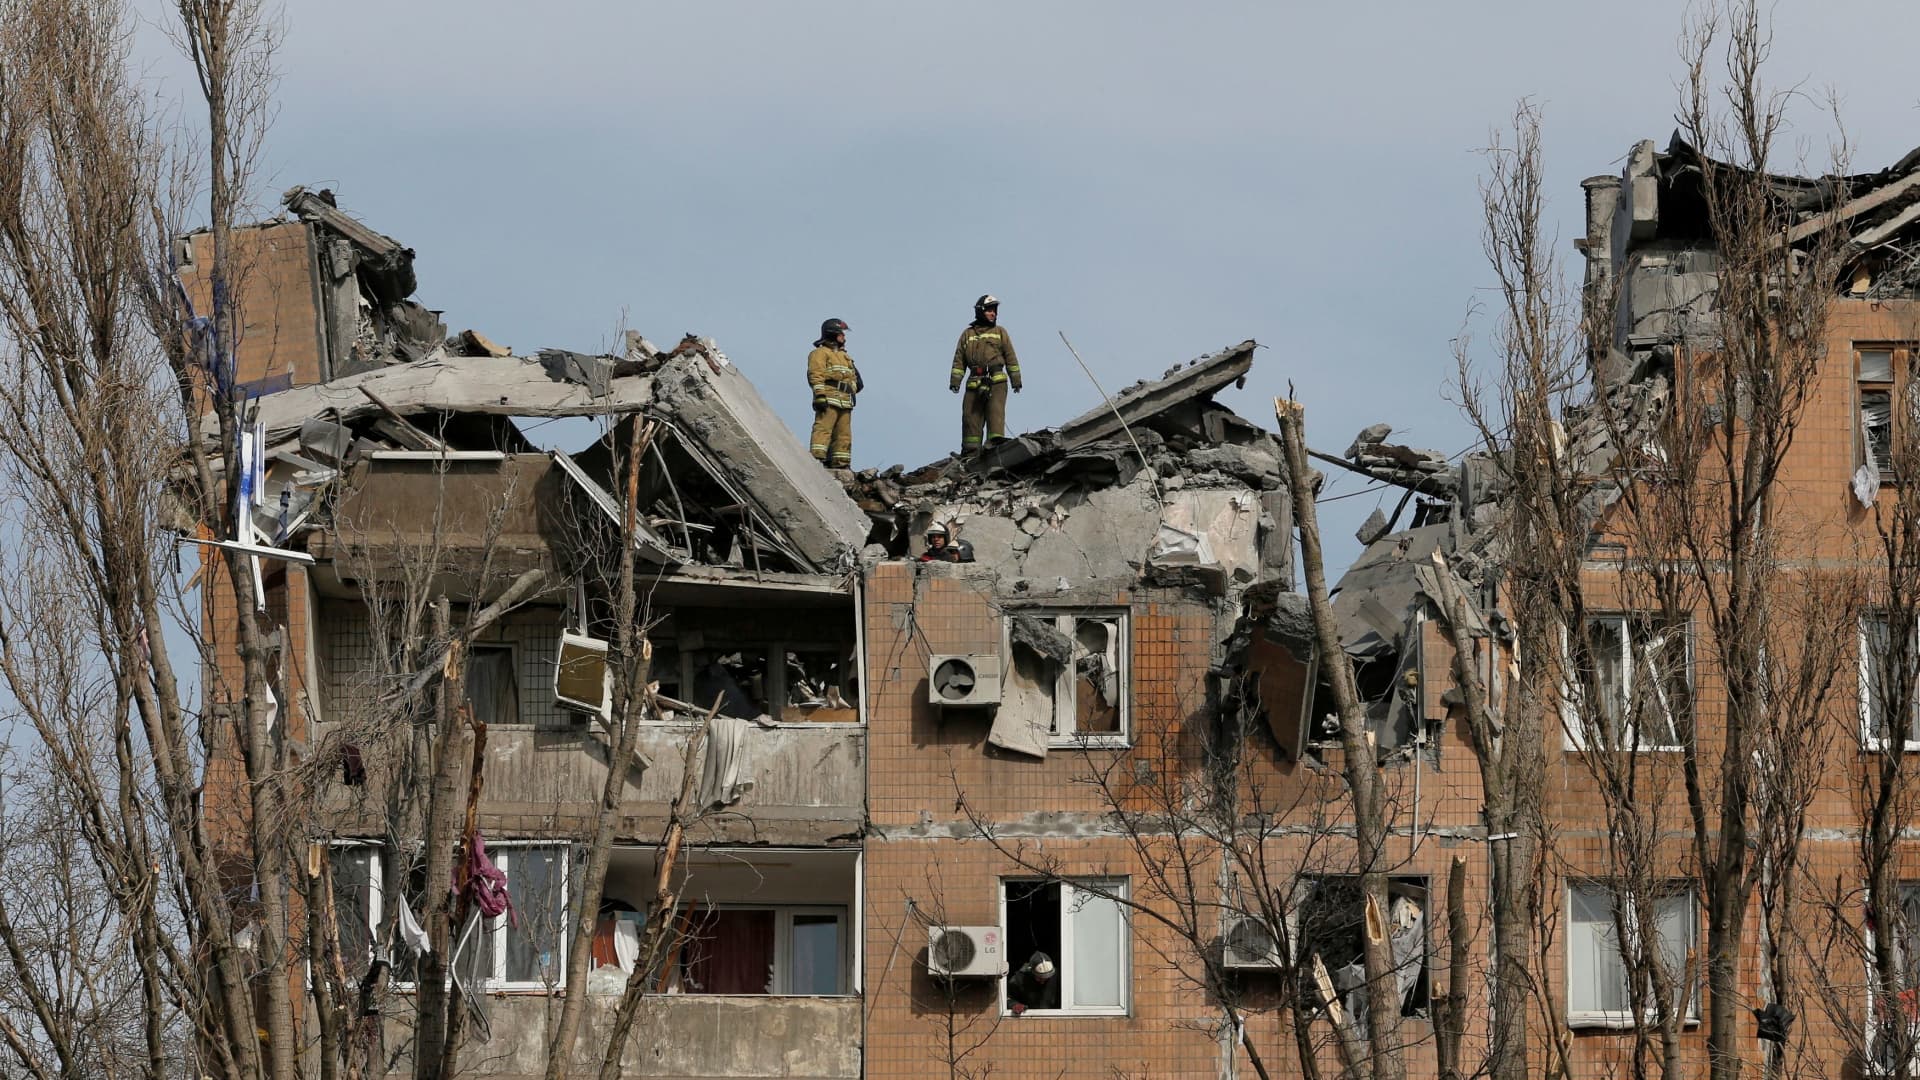 Emergency specialists work at a residential building damaged by shelling during Ukraine-Russia conflict in the separatist-controlled city of Donetsk, Ukraine March 30, 2022.